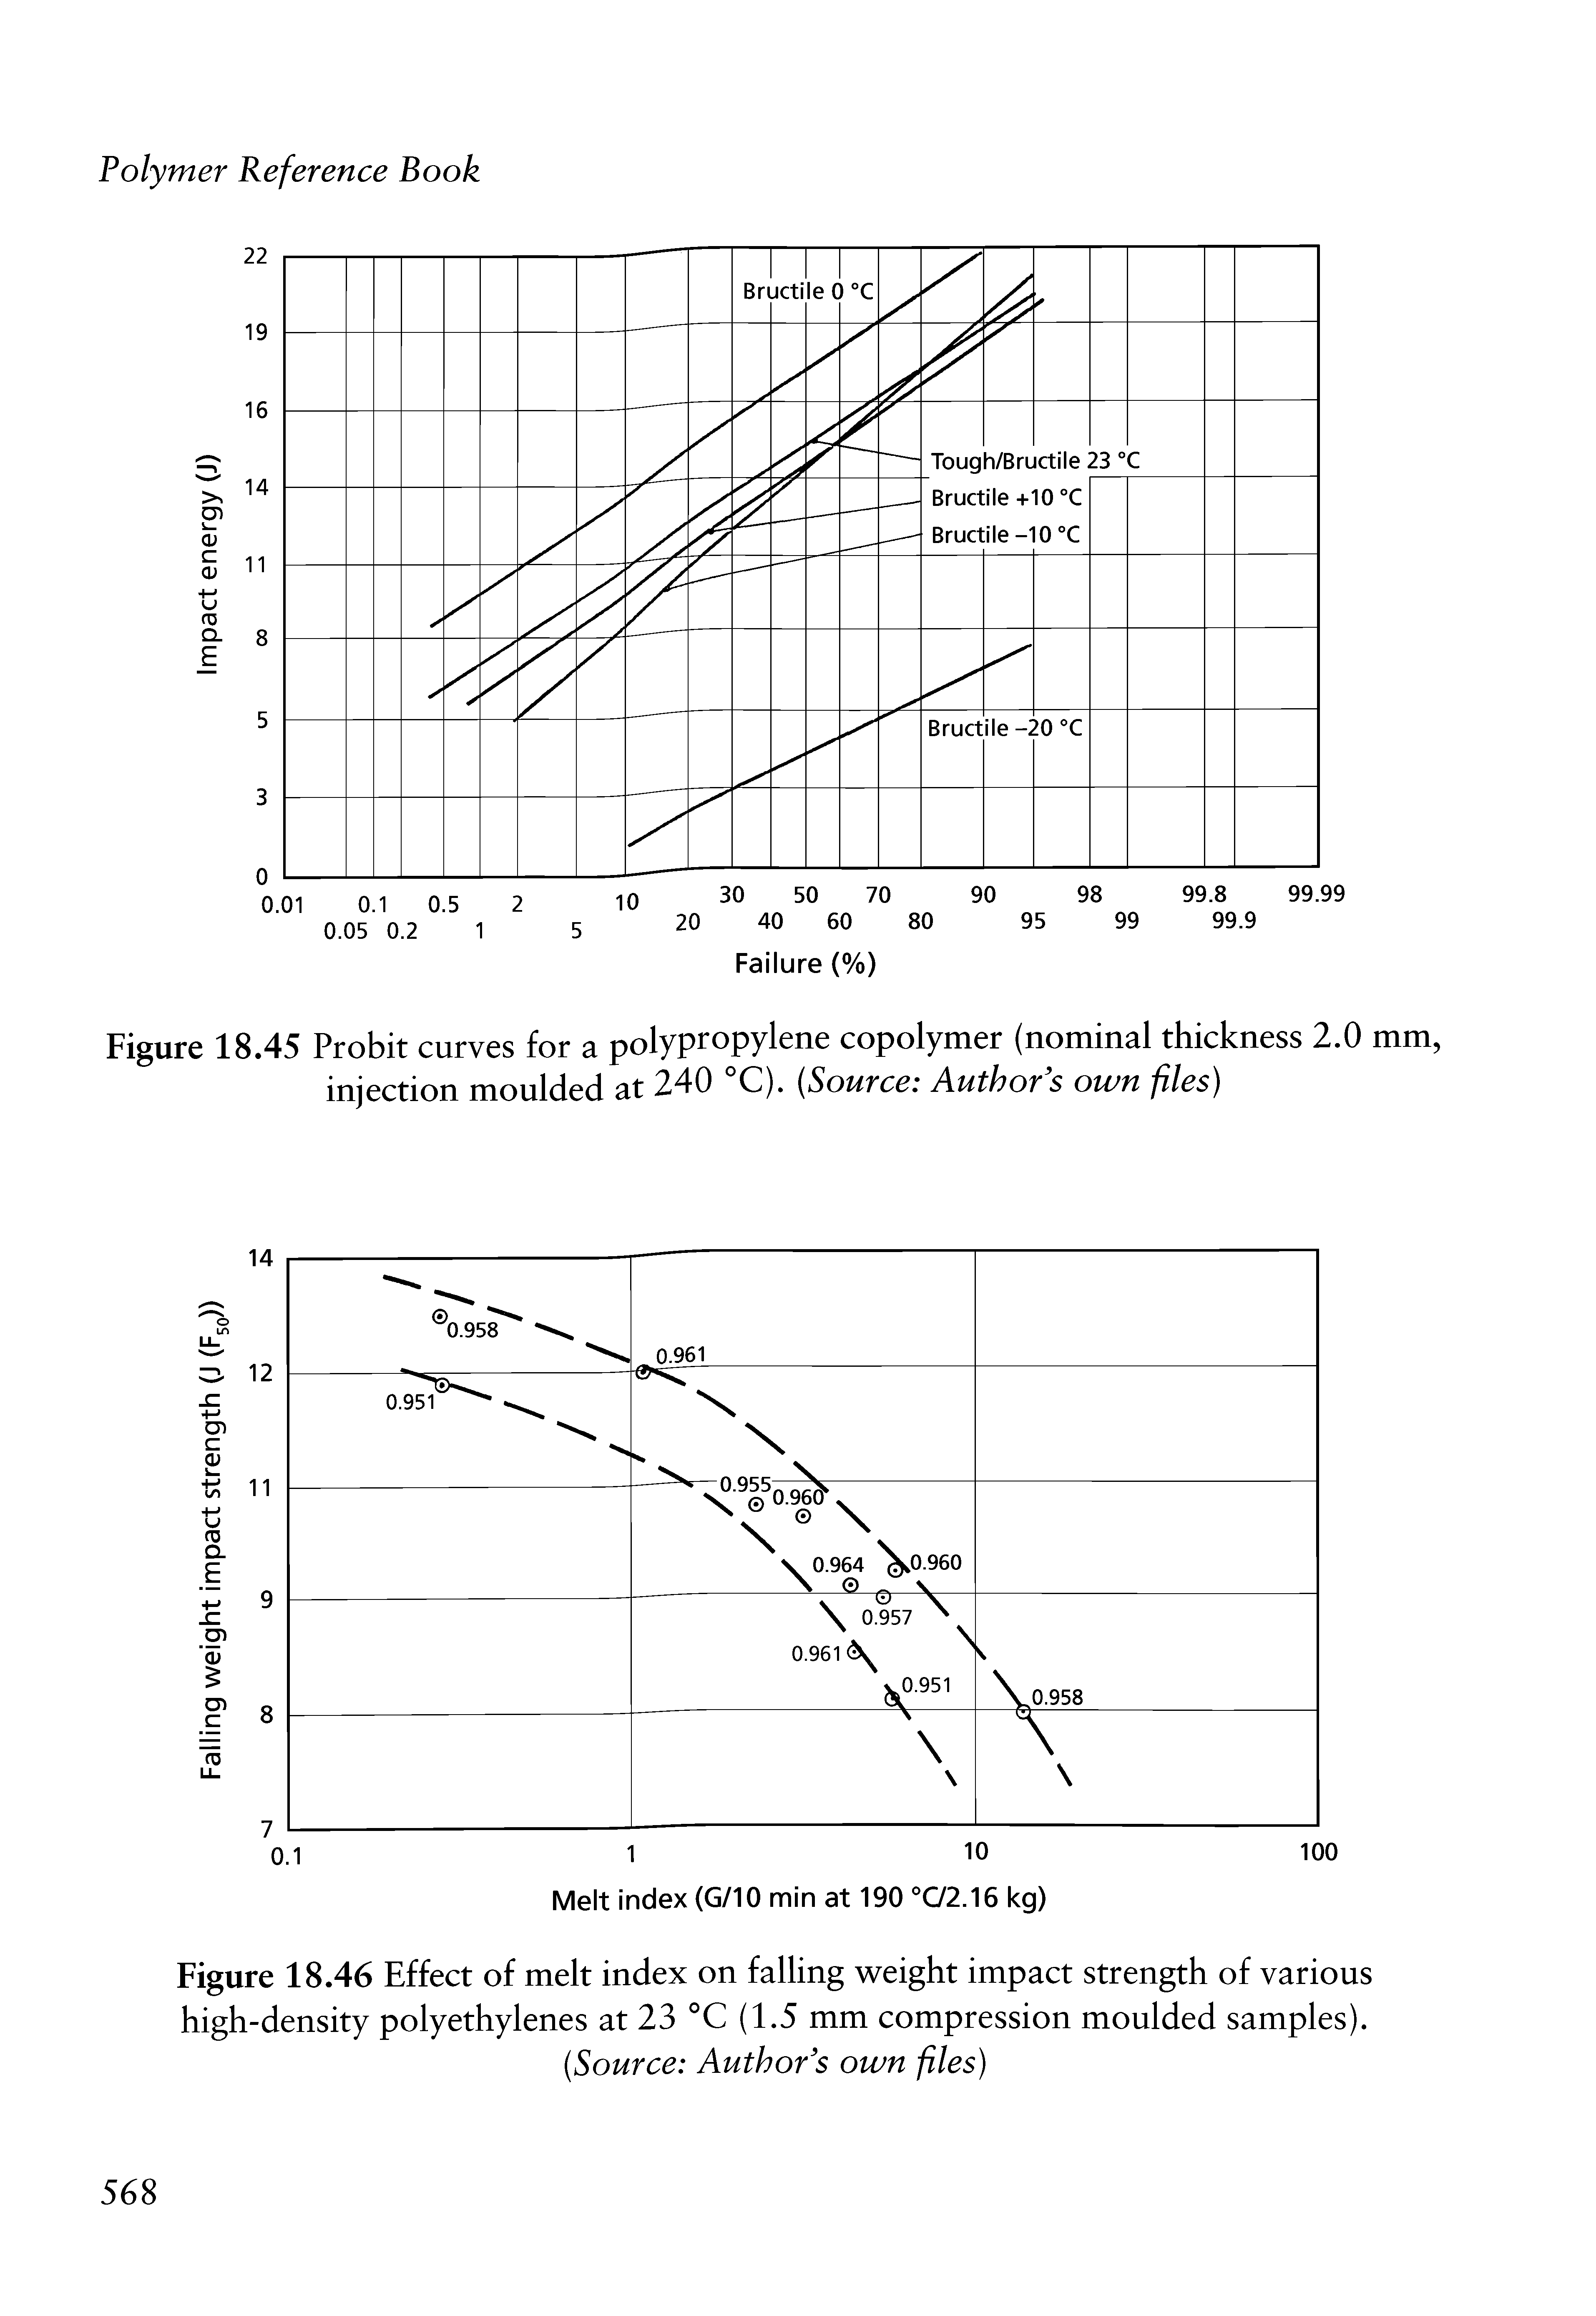 Figure 18.46 Effect of melt index on falling weight impact strength of various high-density polyethylenes at 23 °C (1.5 mm compression moulded samples).